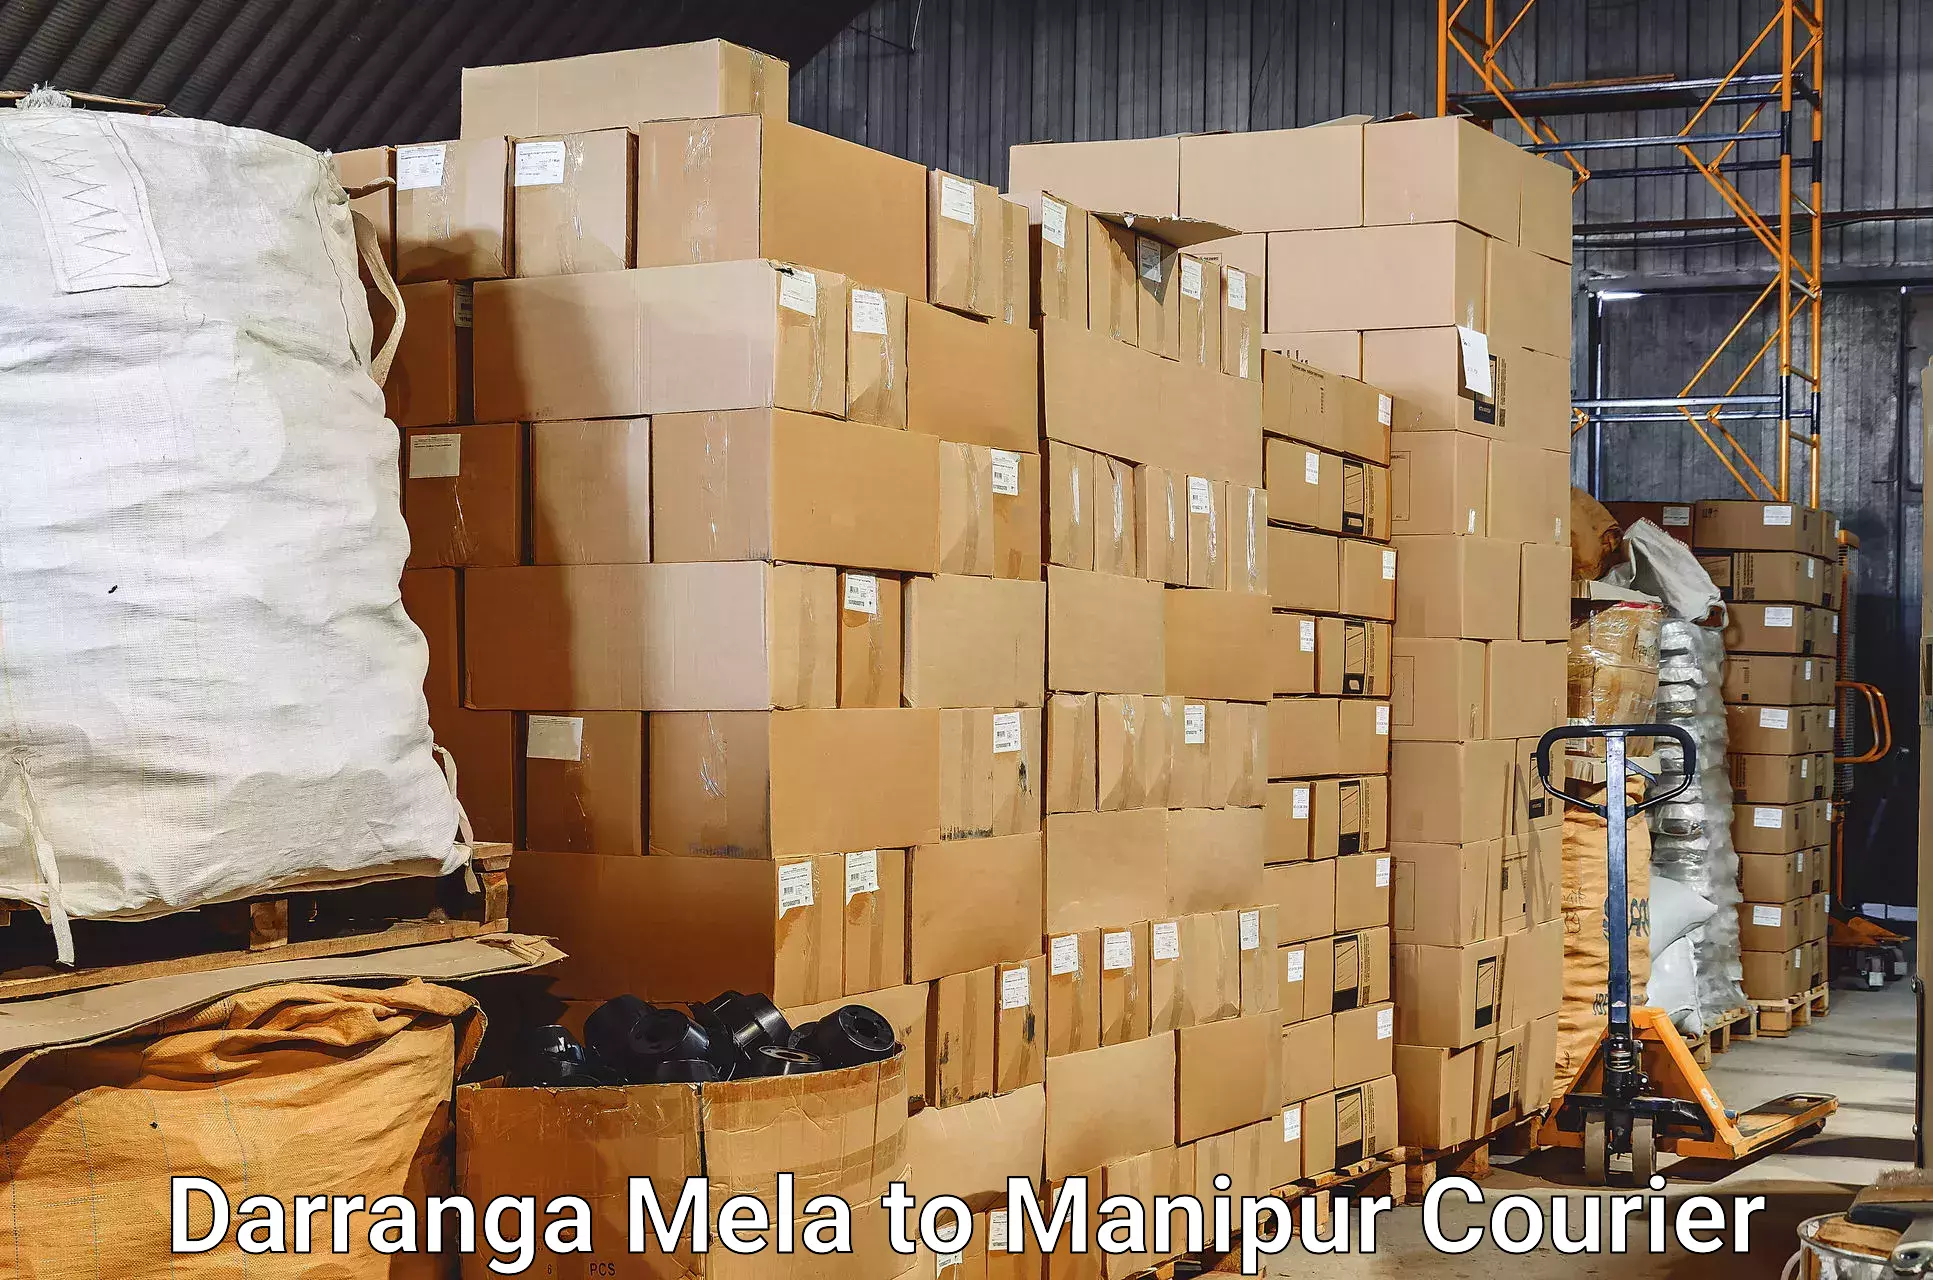 Baggage delivery planning in Darranga Mela to Manipur